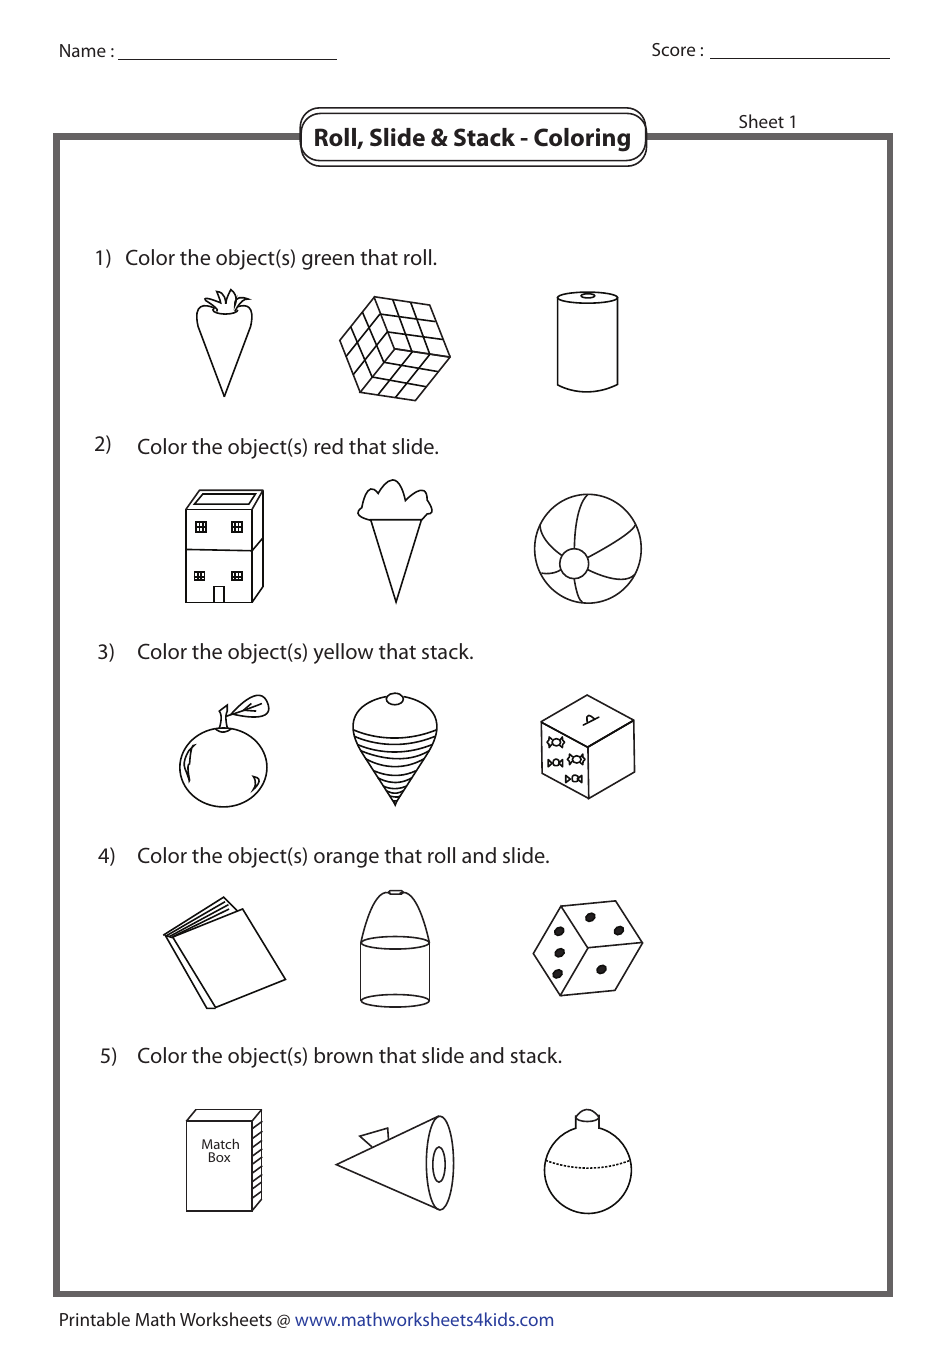 Roll, Slide & Stack - Coloring Worksheet With Answers